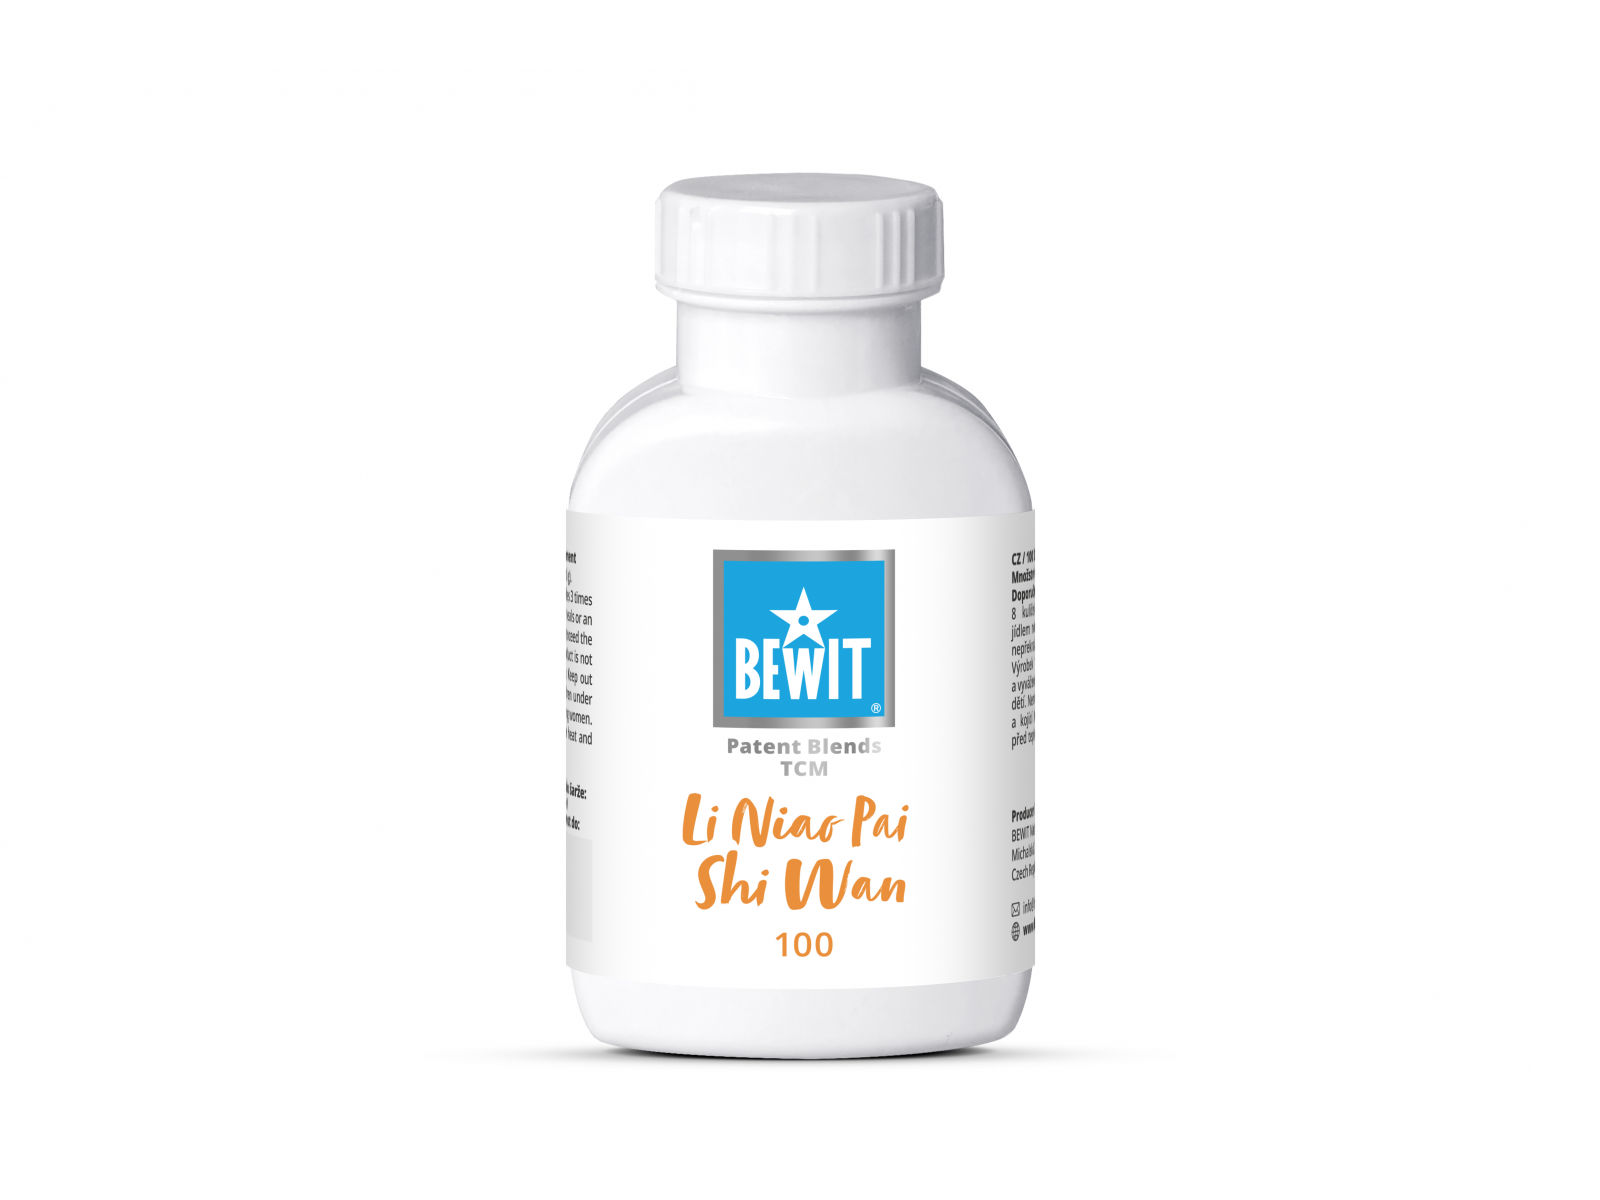 BEWIT Love yourself - Food supplement